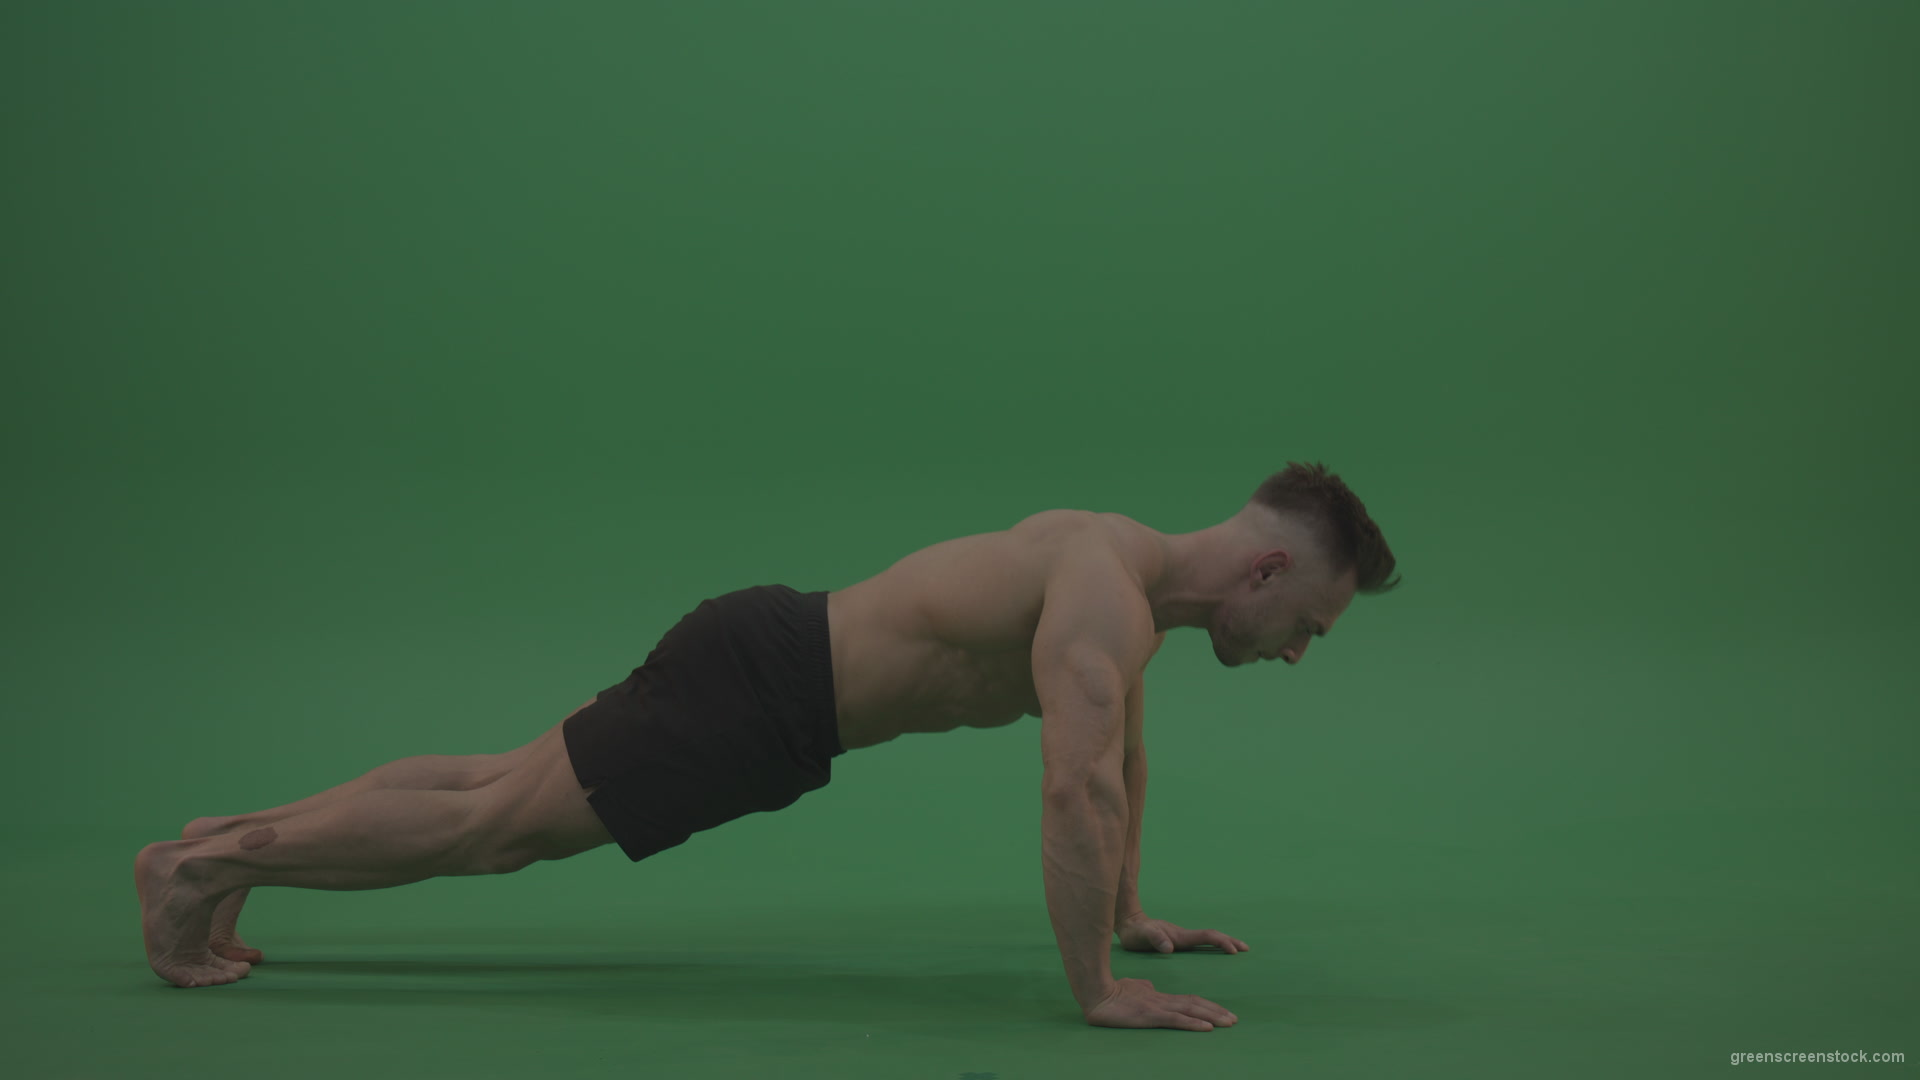 Young_Bodybuilder_Starts_Working_Out_From_Crouching_Terminator_Position_Does_Pull_Ups_Turns_Back_To_The_Start_Position_On_Green_Screen_Wall_Background_004 Green Screen Stock